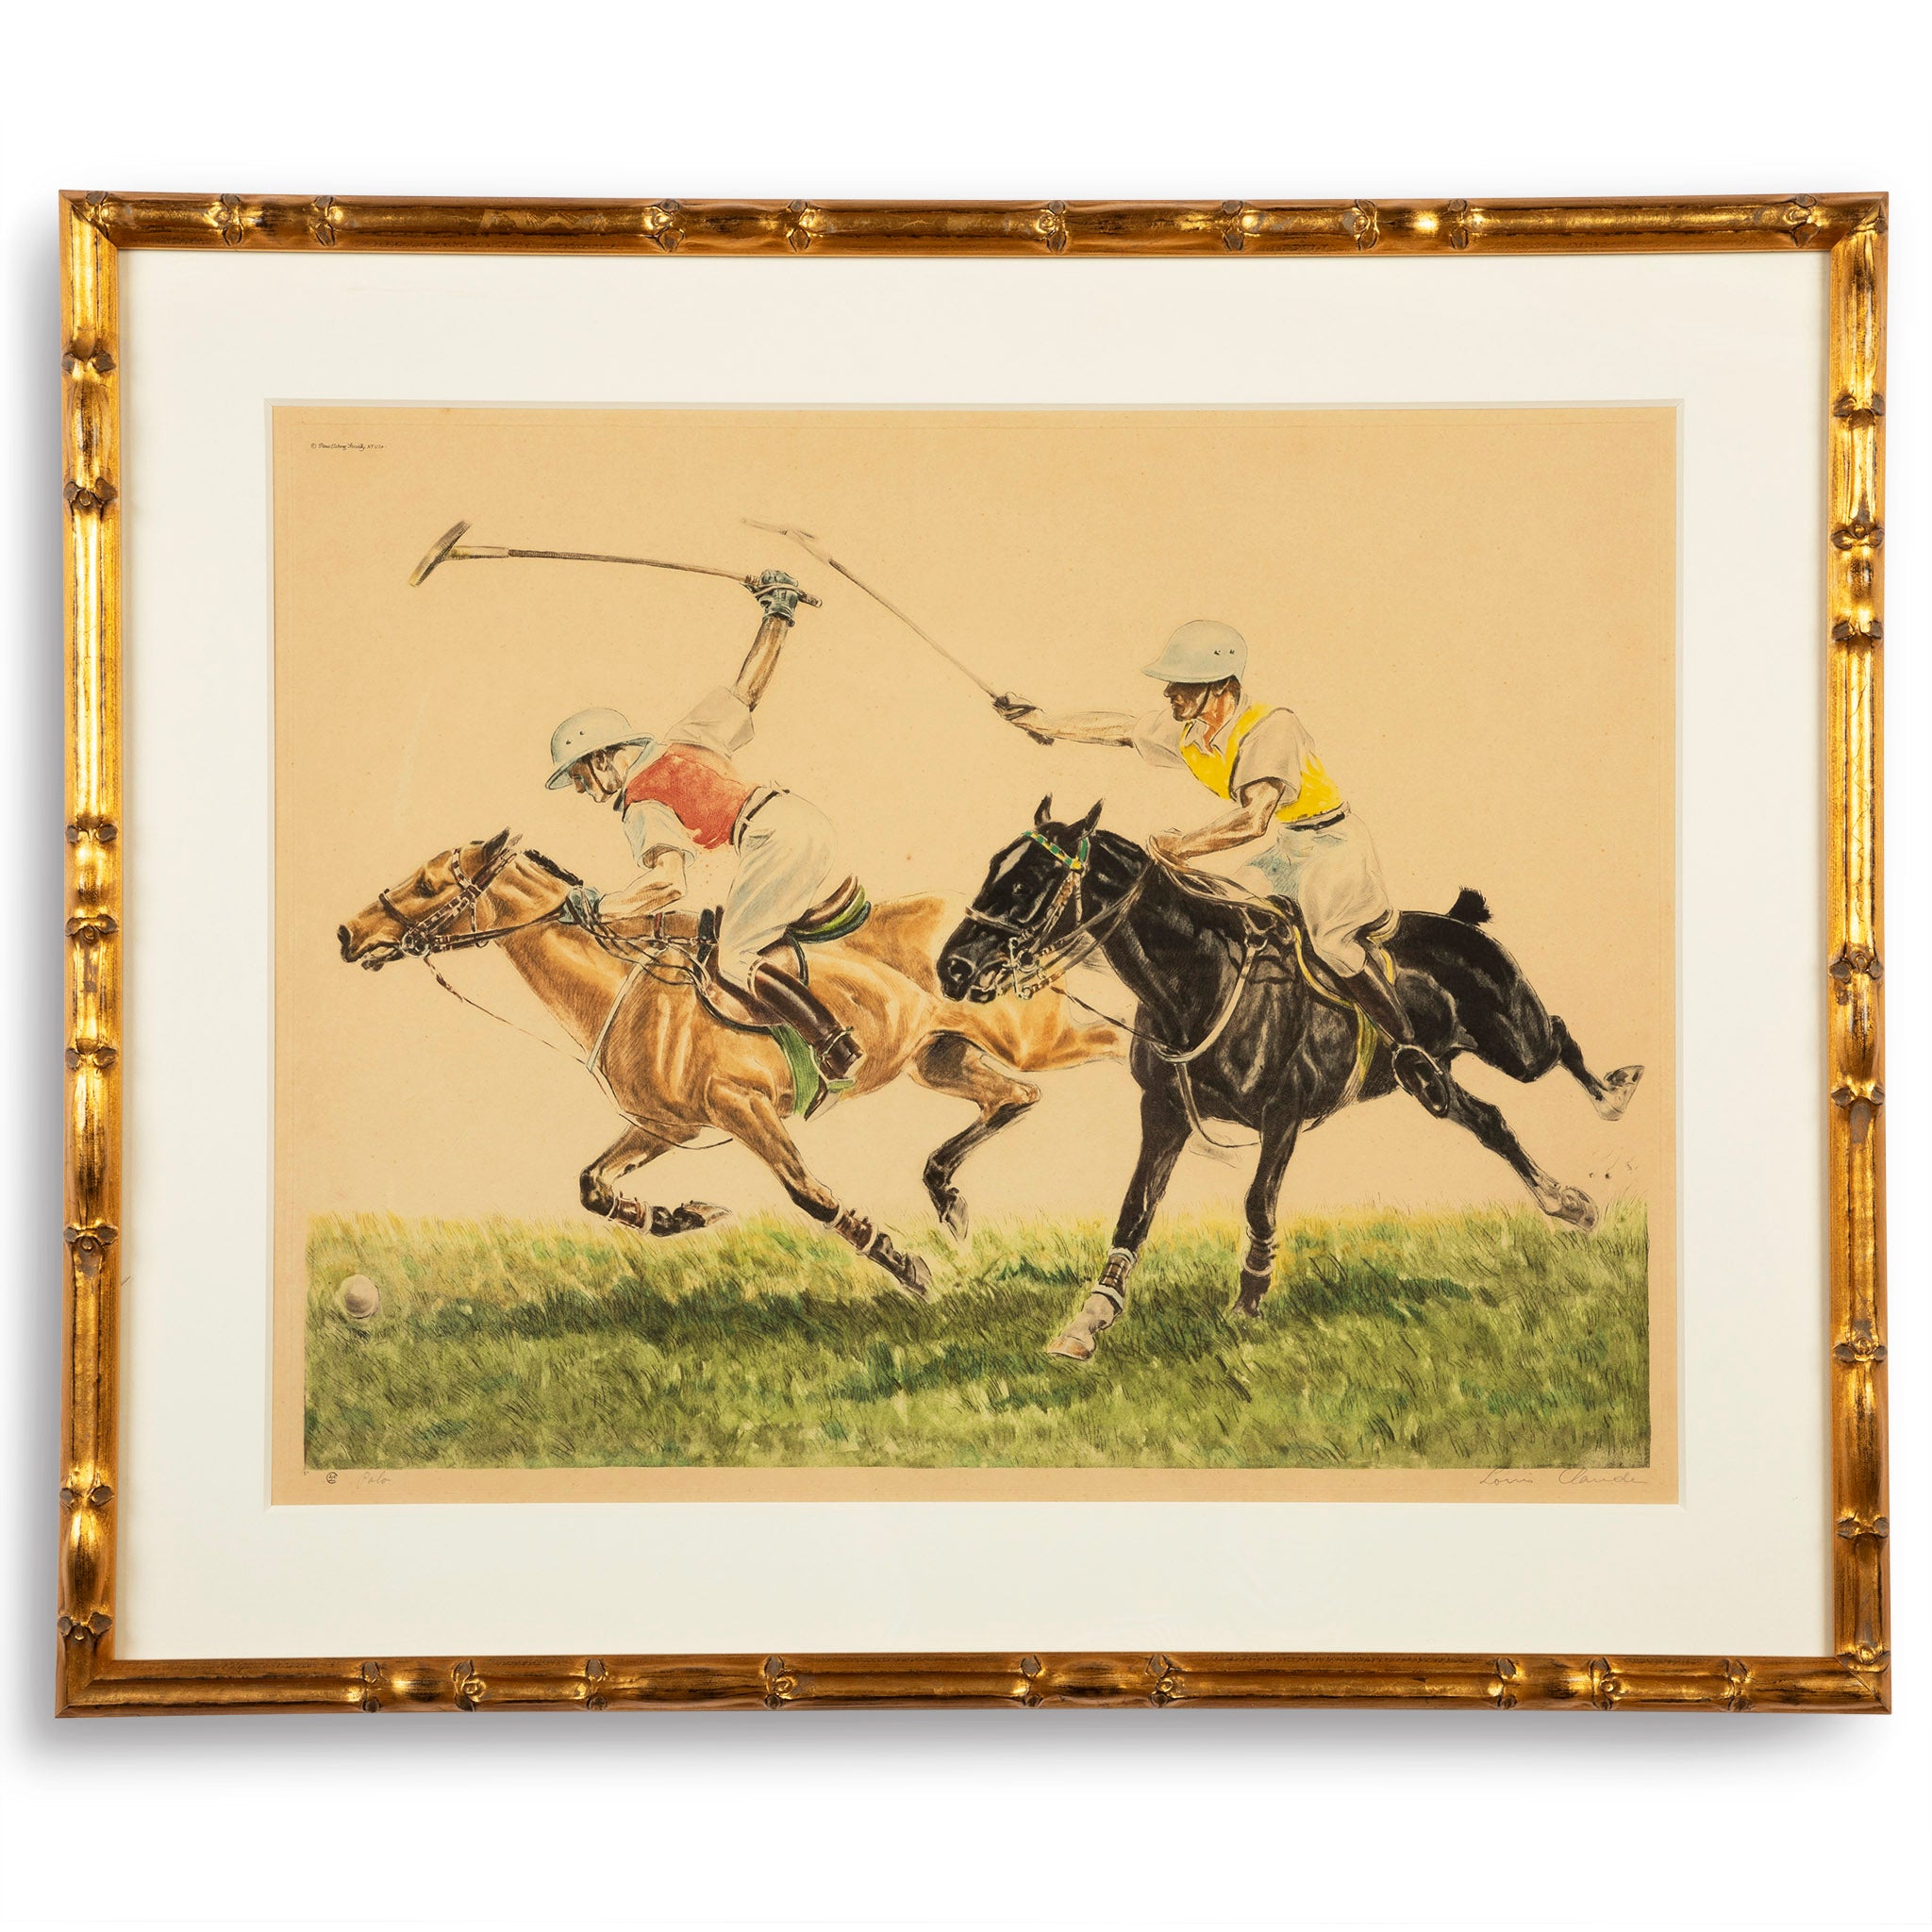 Framed Midcentury Polo Etching by Louis Claude